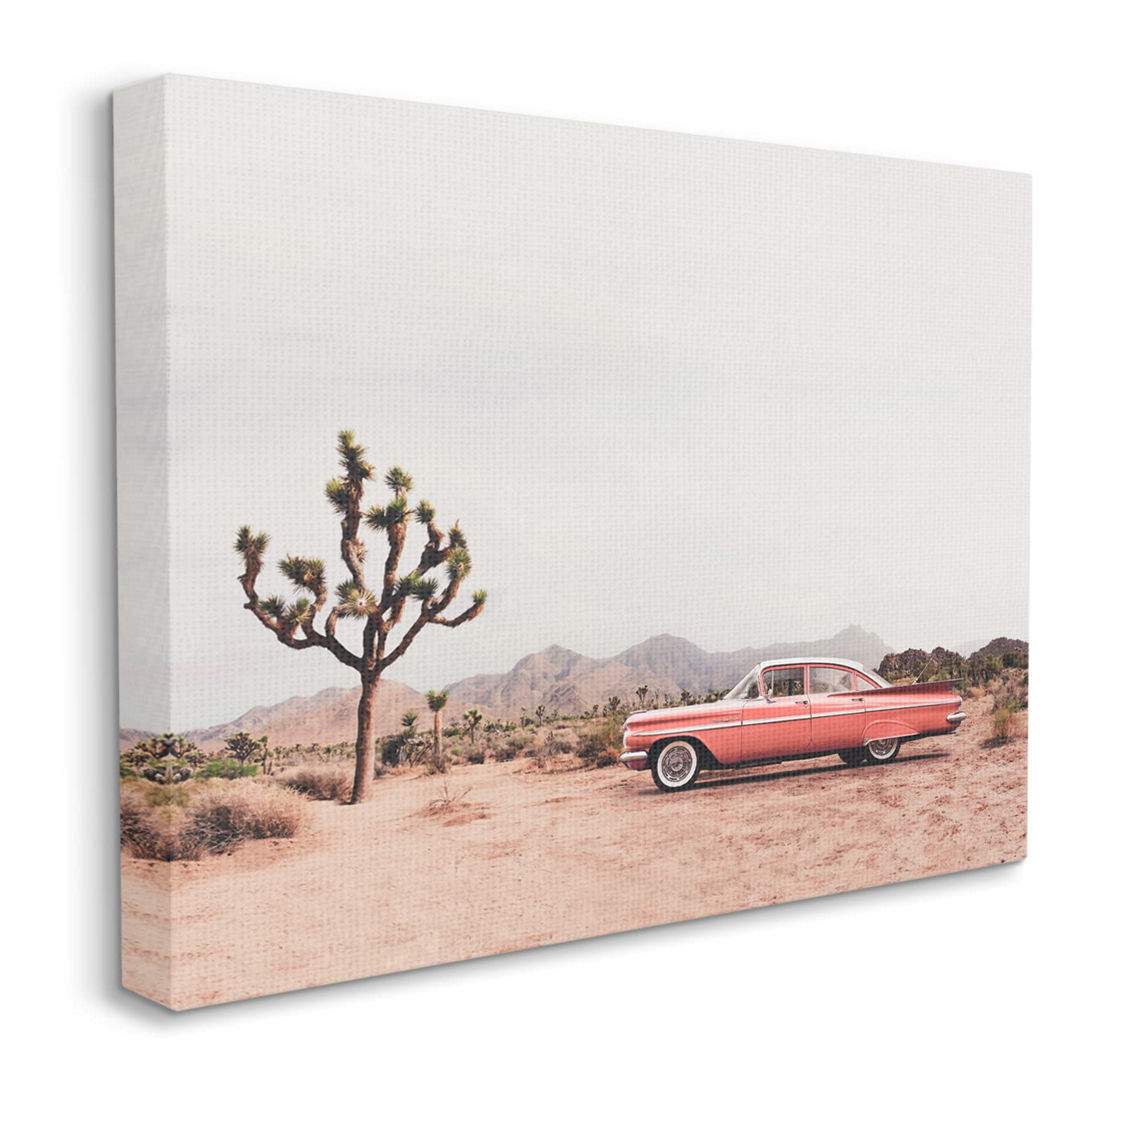 Stupell Canvas Wall Art Vintage Car in Desert Scenery, 30 x 40 - Image 3 of 5